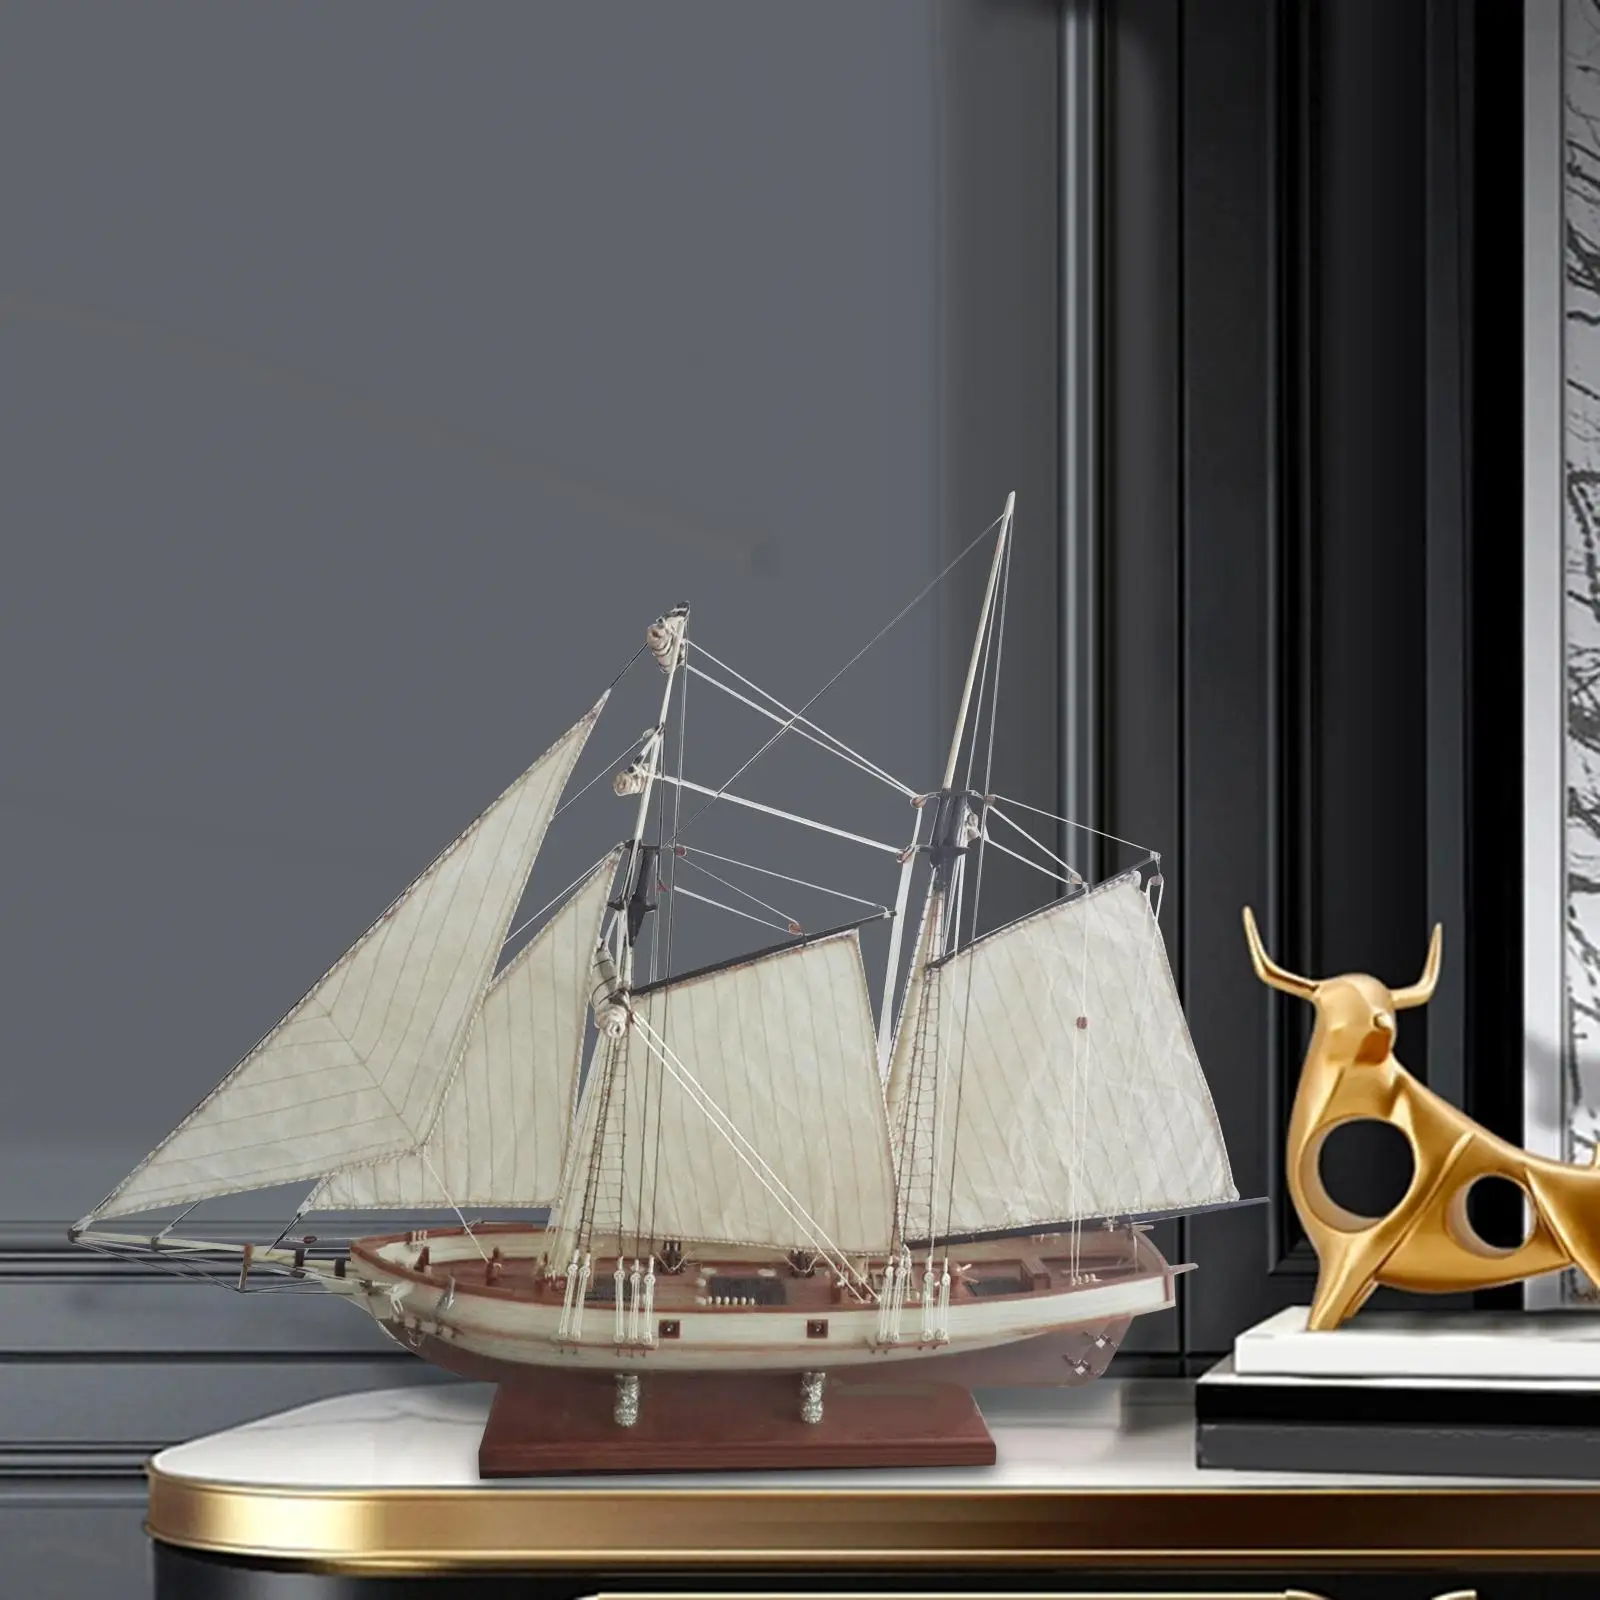 1:70 Scale Sailing Boat Model Ship Wood Model Building Kits DIY Crafts for Home Office Birthday Gift Desk Decor